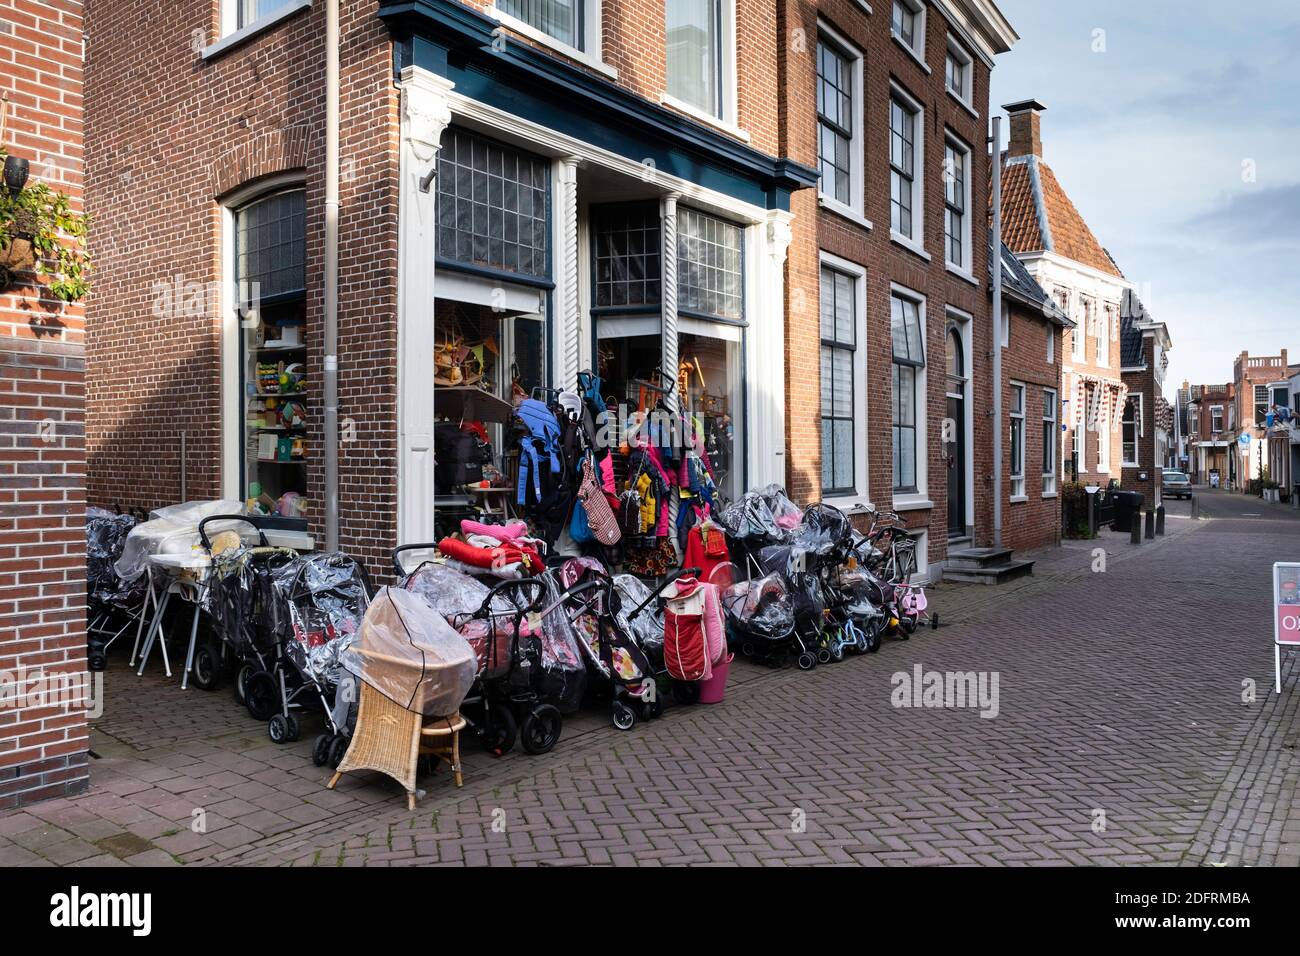 Overcrowded display of bicycles and other items at a sale in front of the entrance and window of a store in Appingedam, Groningen, The Netherlands Stock Photo